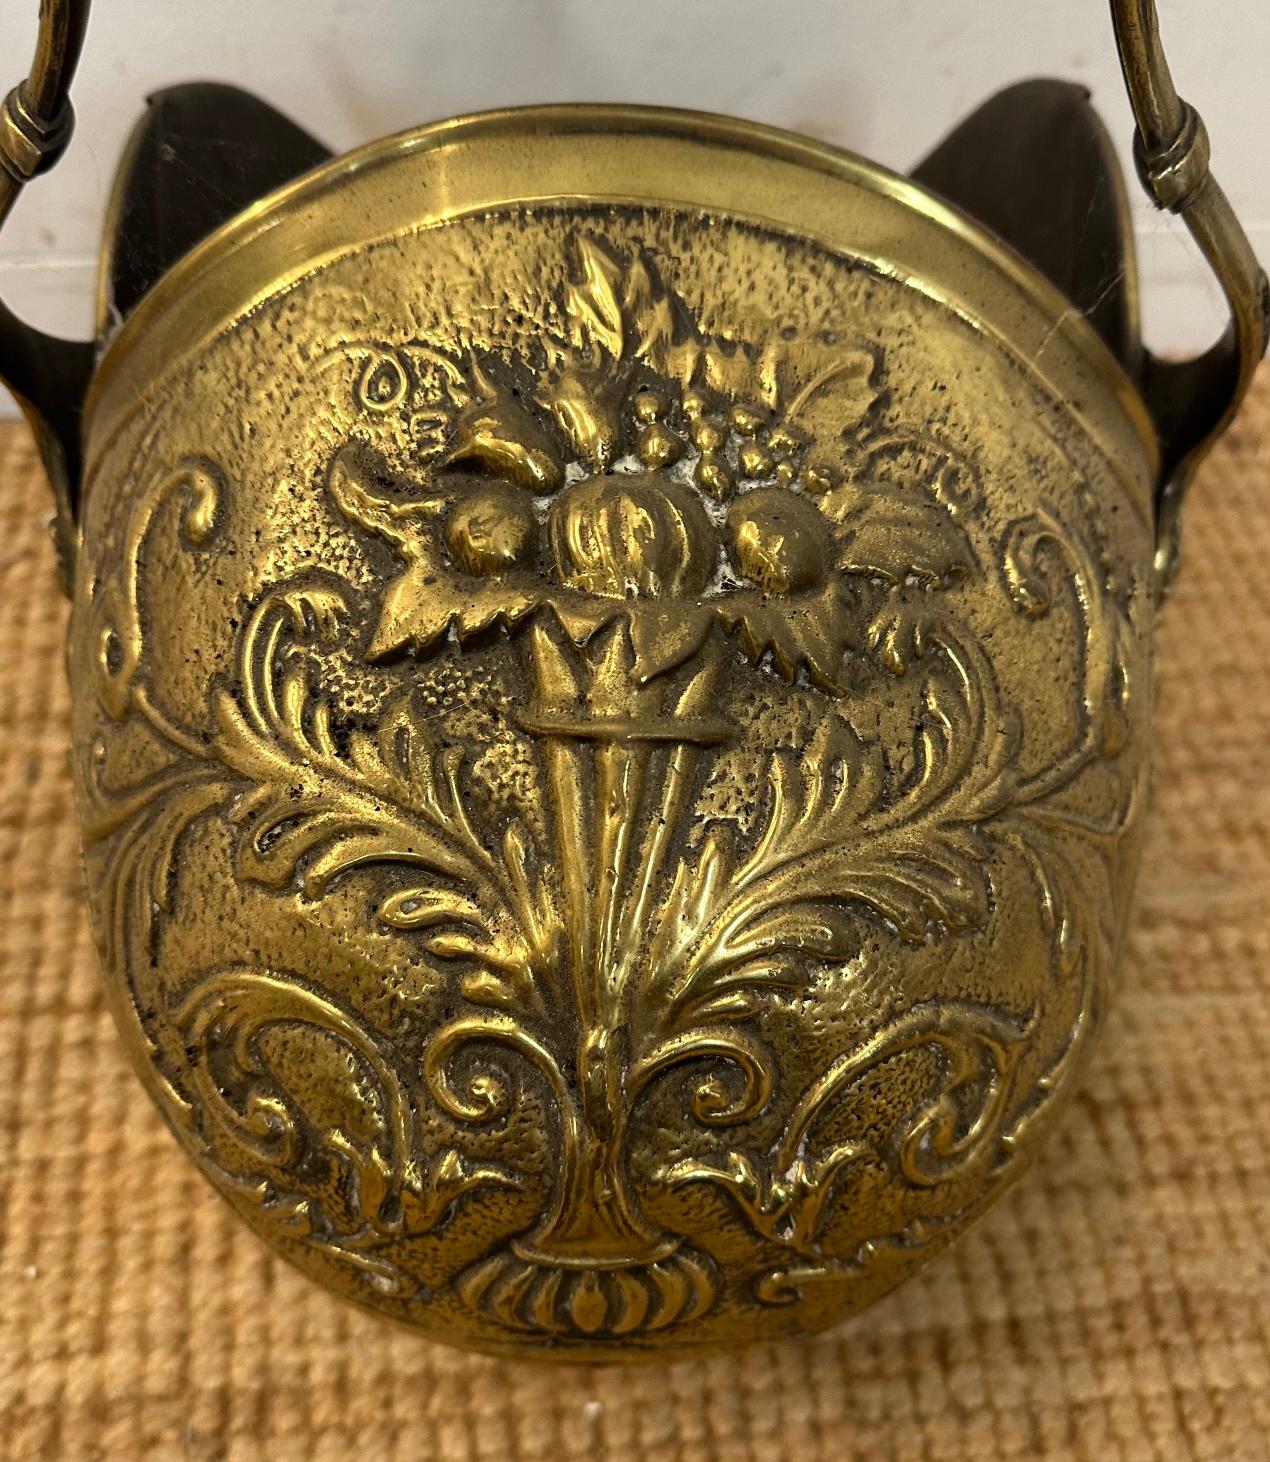 A vintage brass coal scuttle with an arts and crafts repousee pattern - Image 2 of 4